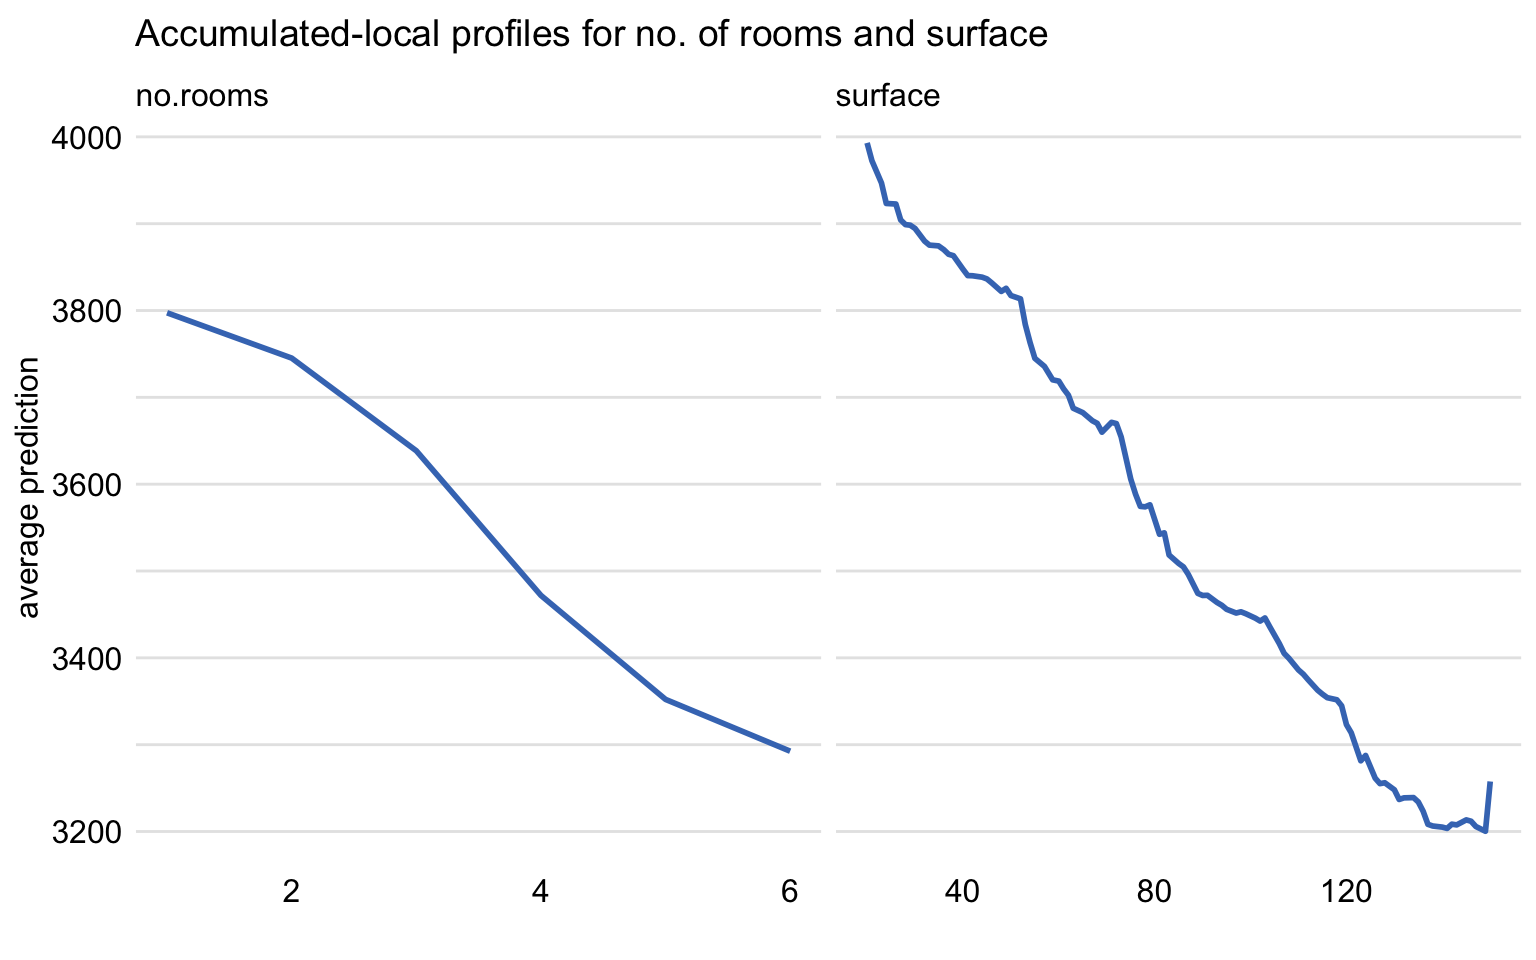 Accumulated-local profiles for the random forest model and explanatory variables no.rooms and surface for the apartment-prices dataset.